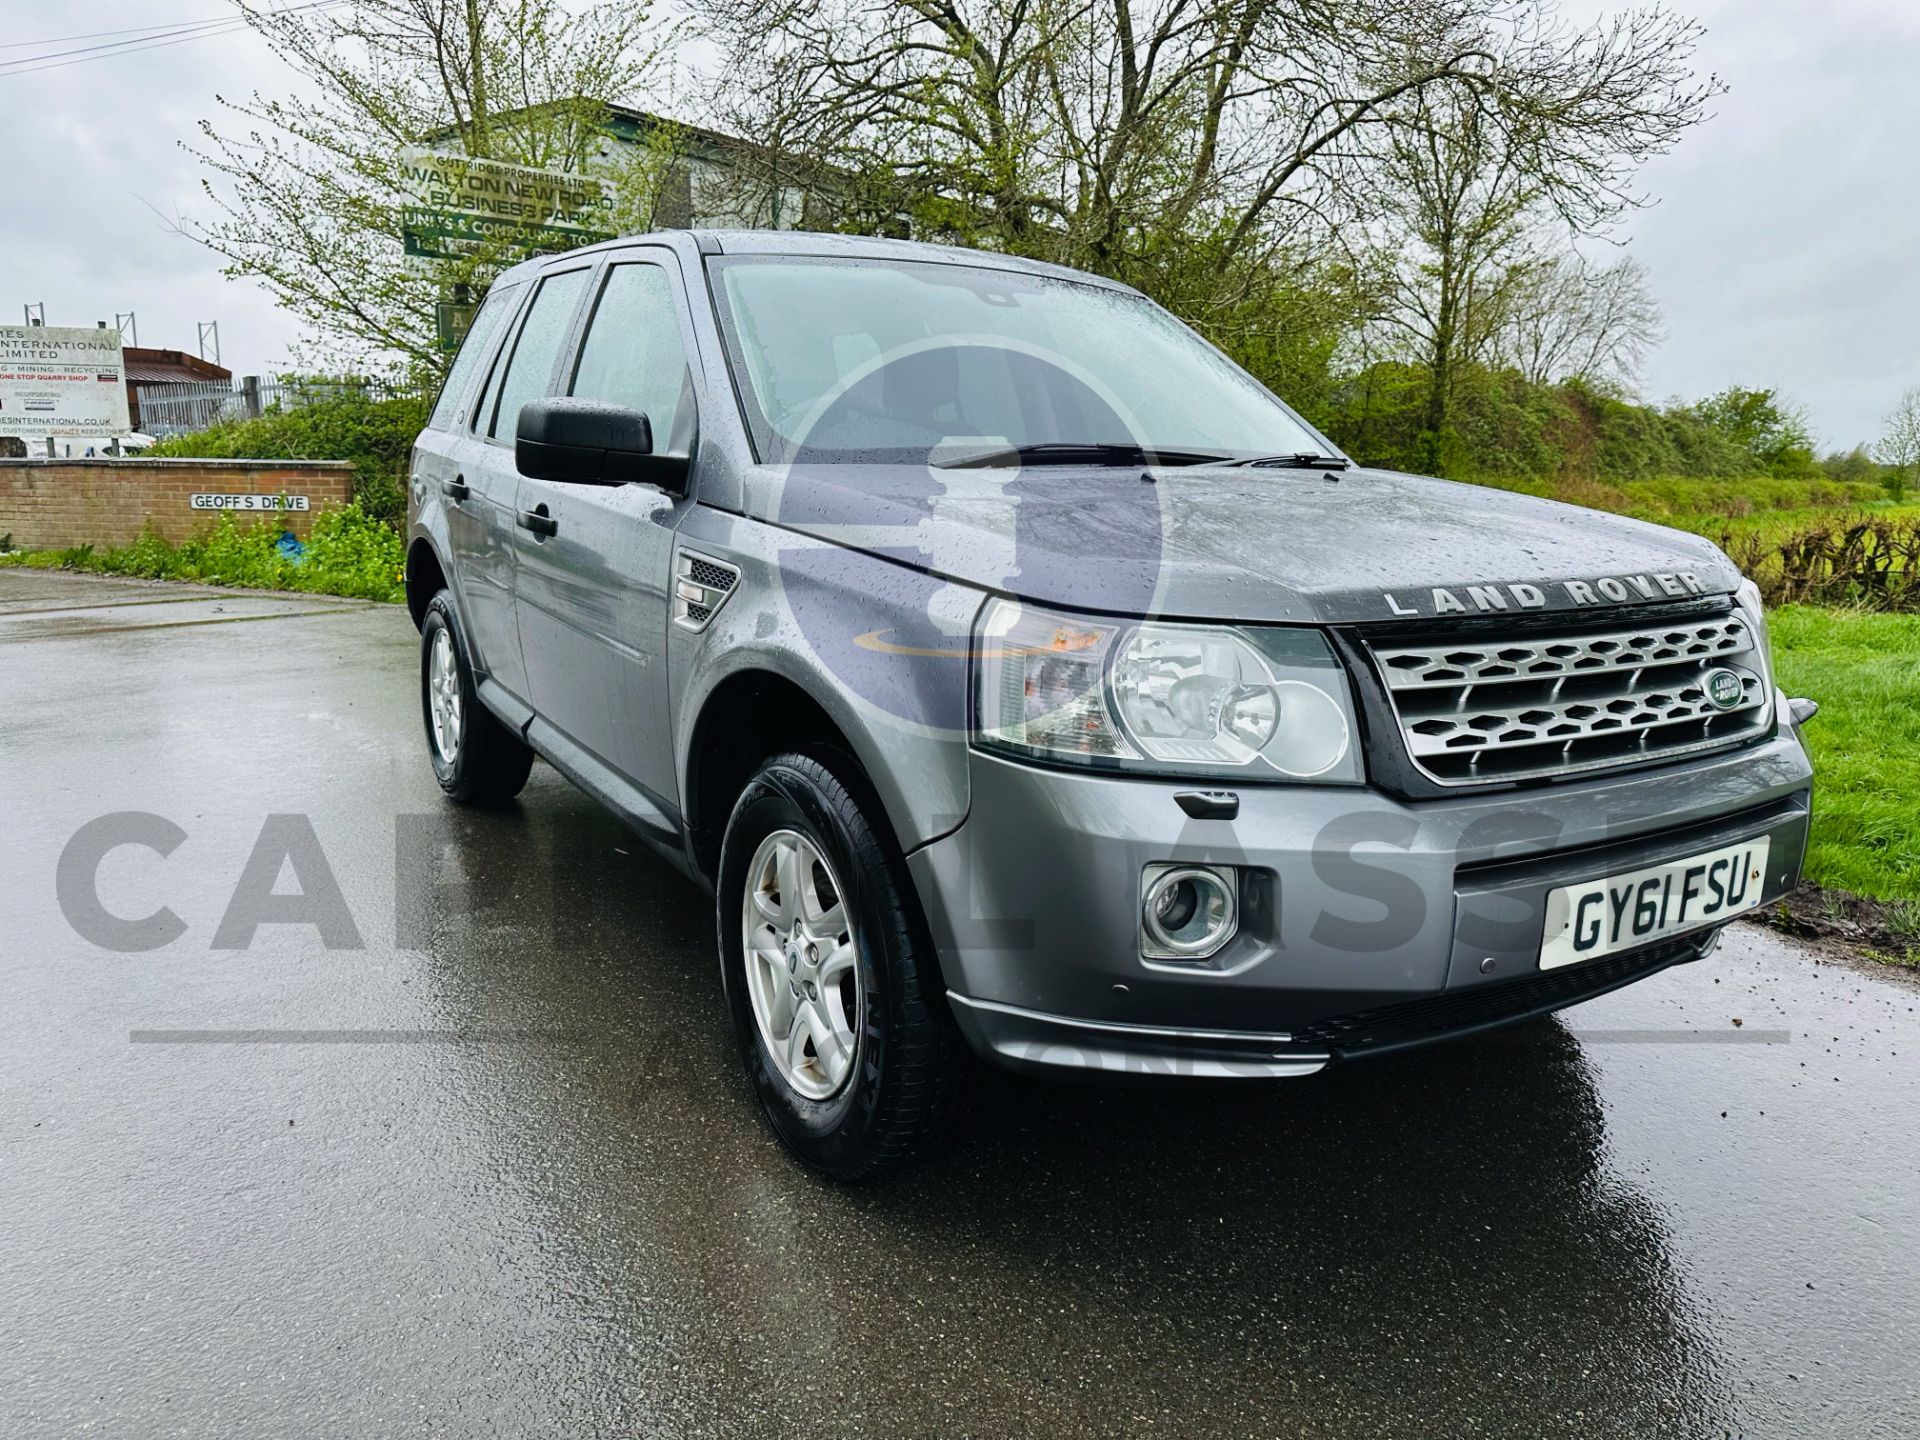 (ON SALE) LANDROVER FREELANDER 2.2TD4 S EDITION "AUTO - 2012 MODEL - AIR CON - FSH - Image 2 of 33